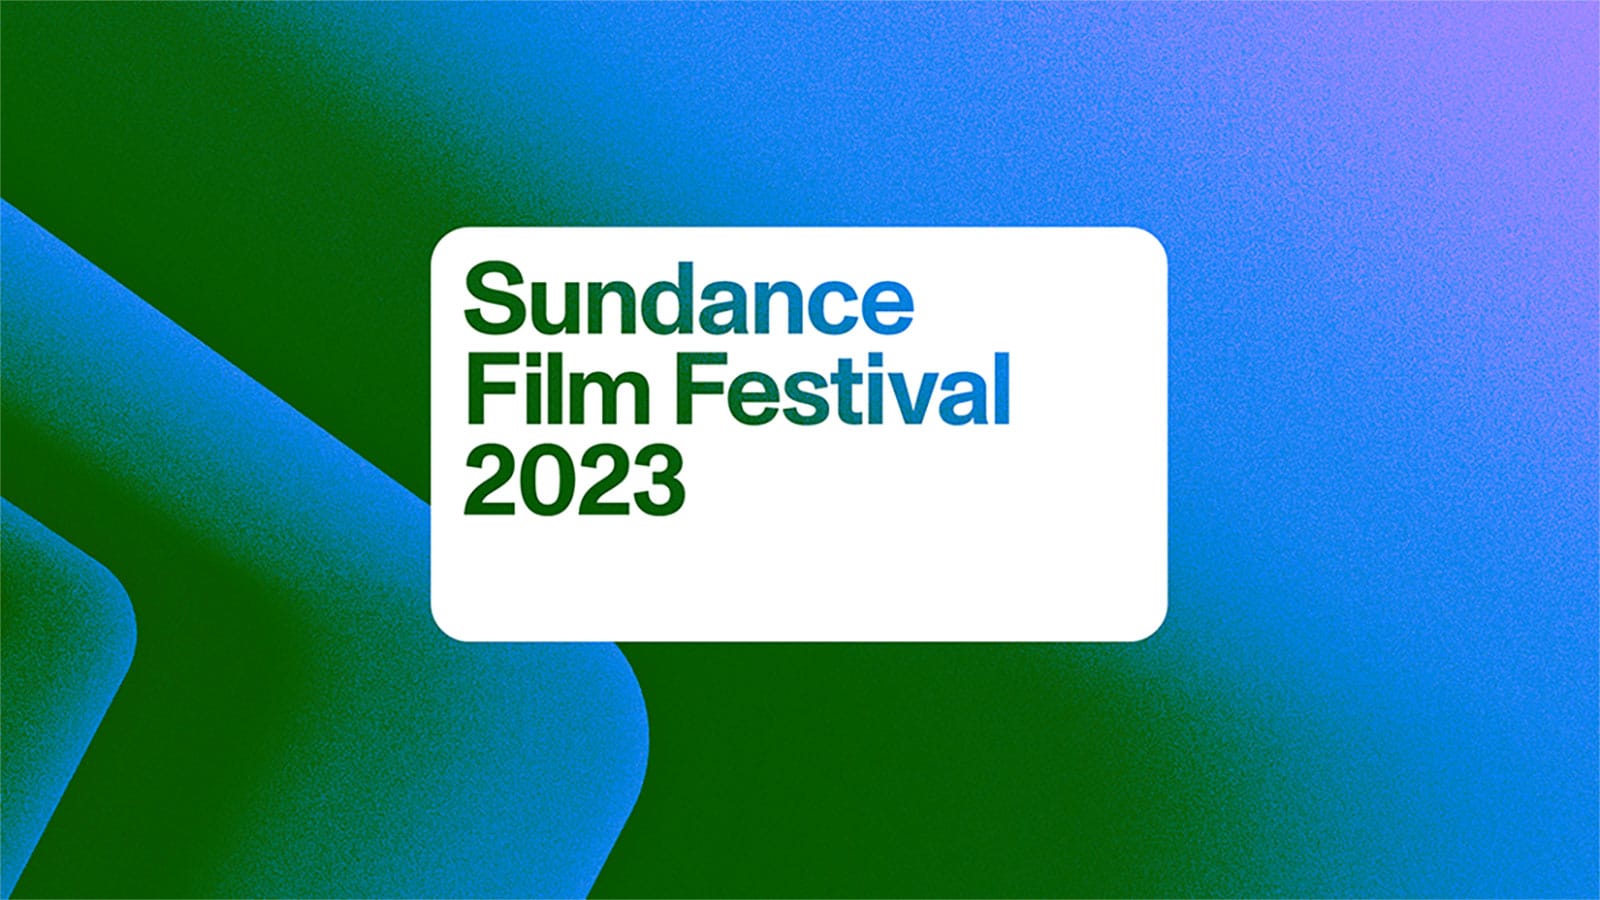 Green and blue graphic for Sundance Film Festival 2023